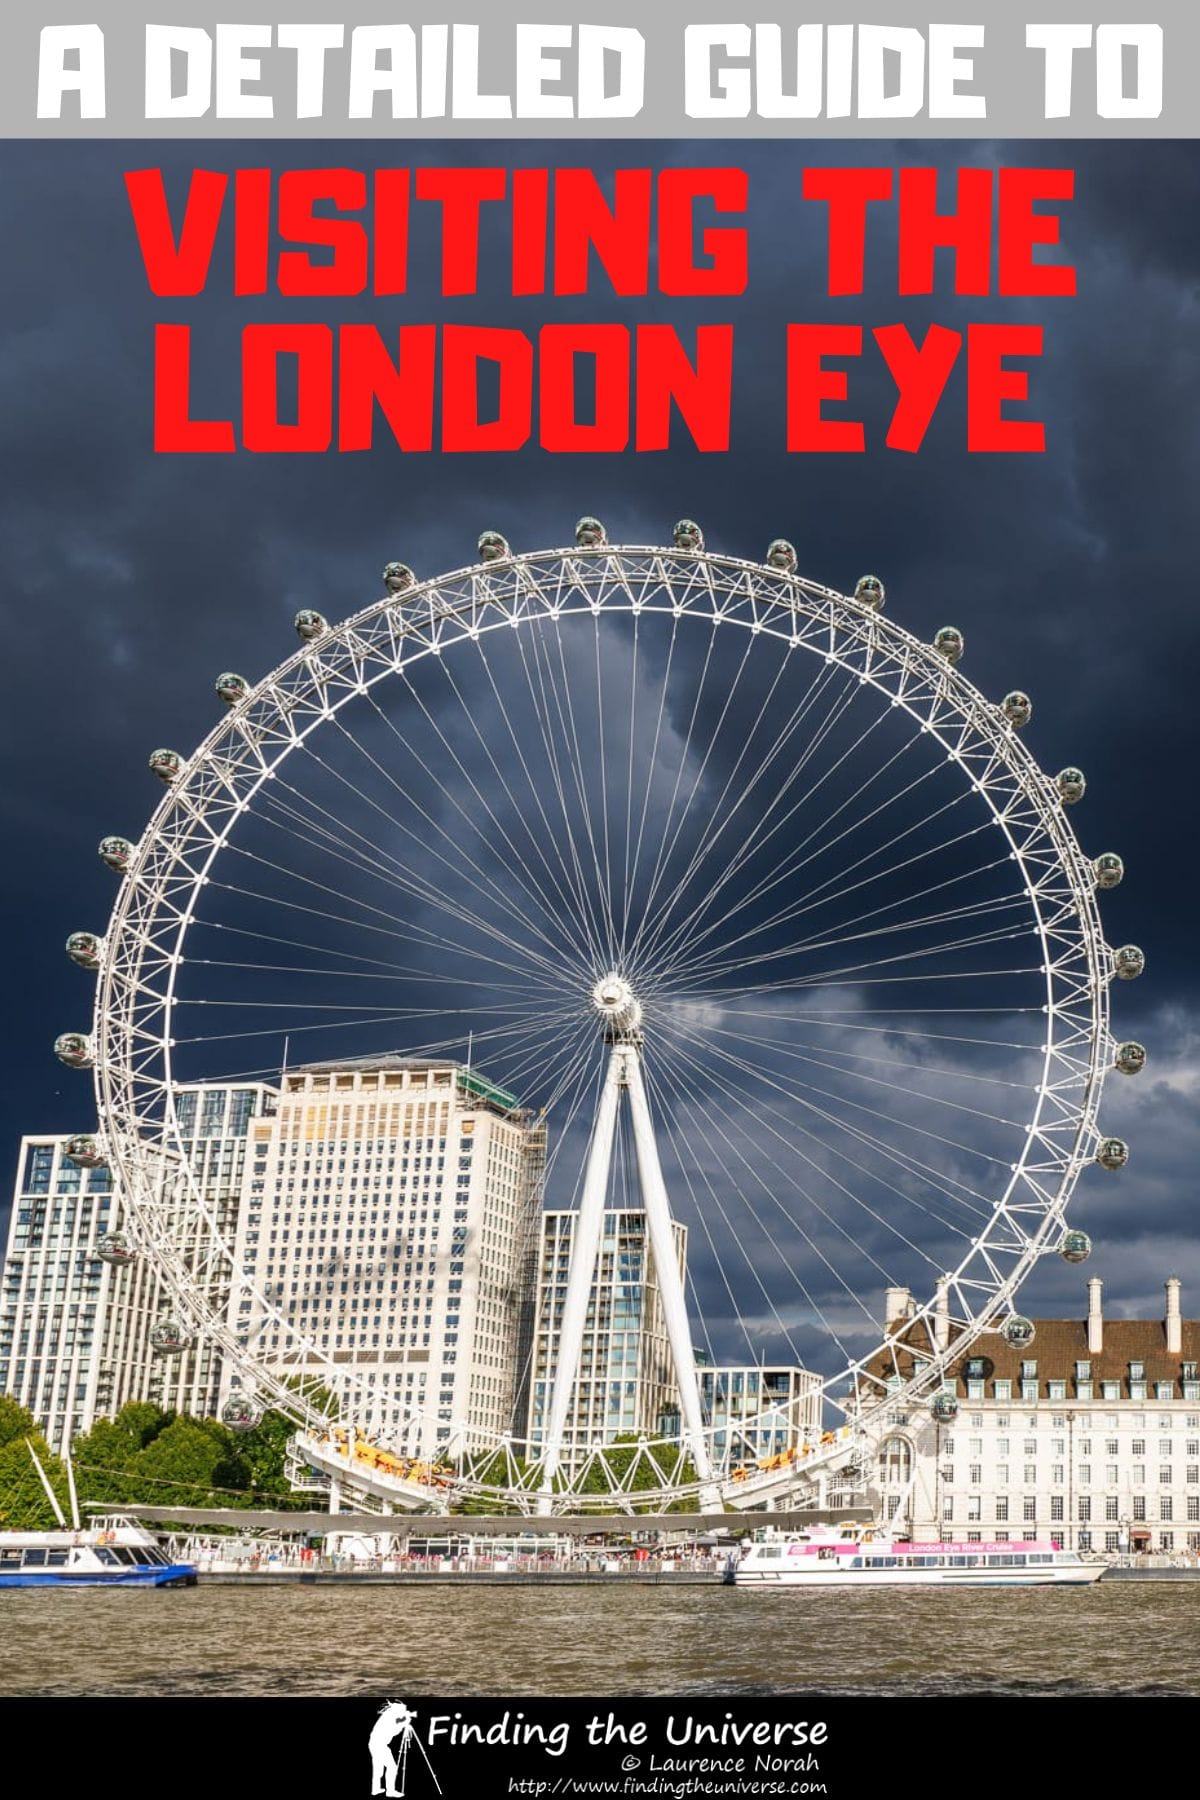 A complete guide to visiting the London Eye. Facts about the London Eye, tips on visiting, discount London Eye tickets and more!